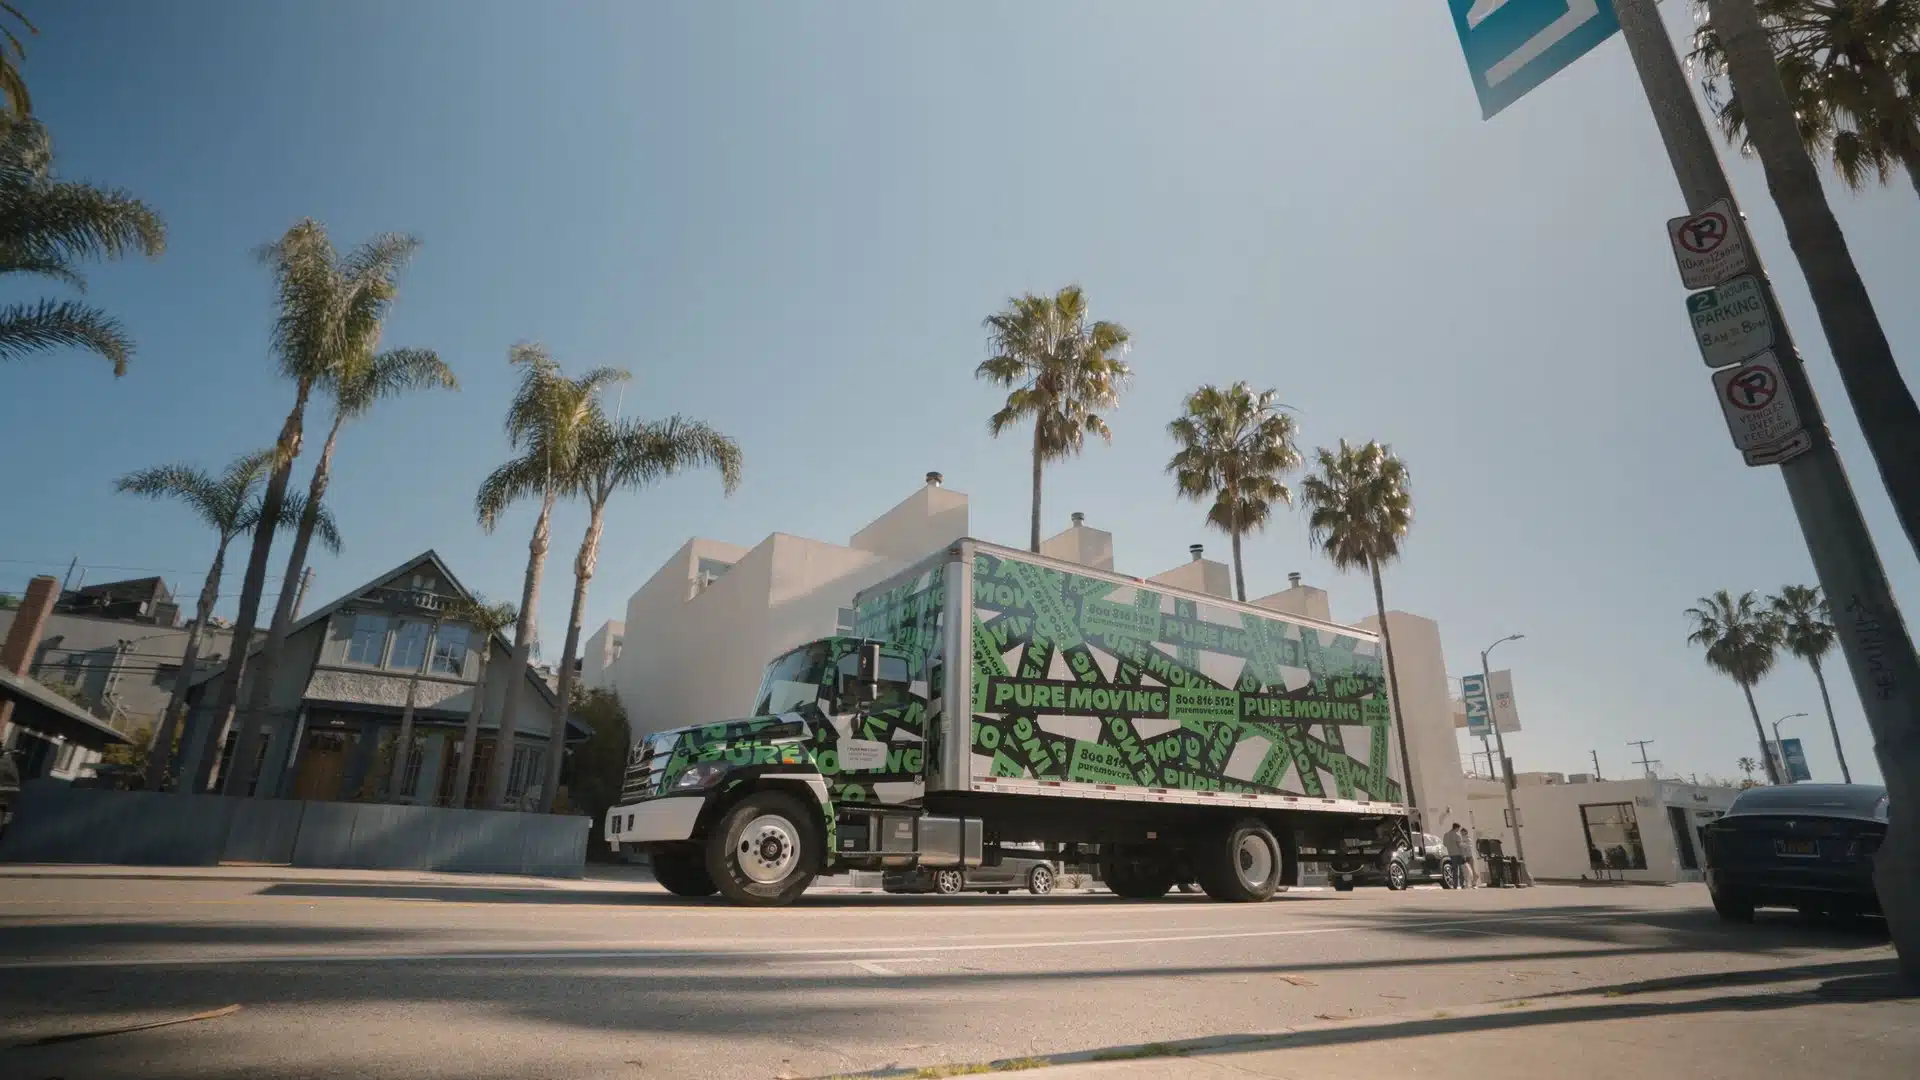 A green and white moving truck is parked on a sunny street lined with palm trees and buildings, signaling someone's exciting journey of moving to Los Angeles.